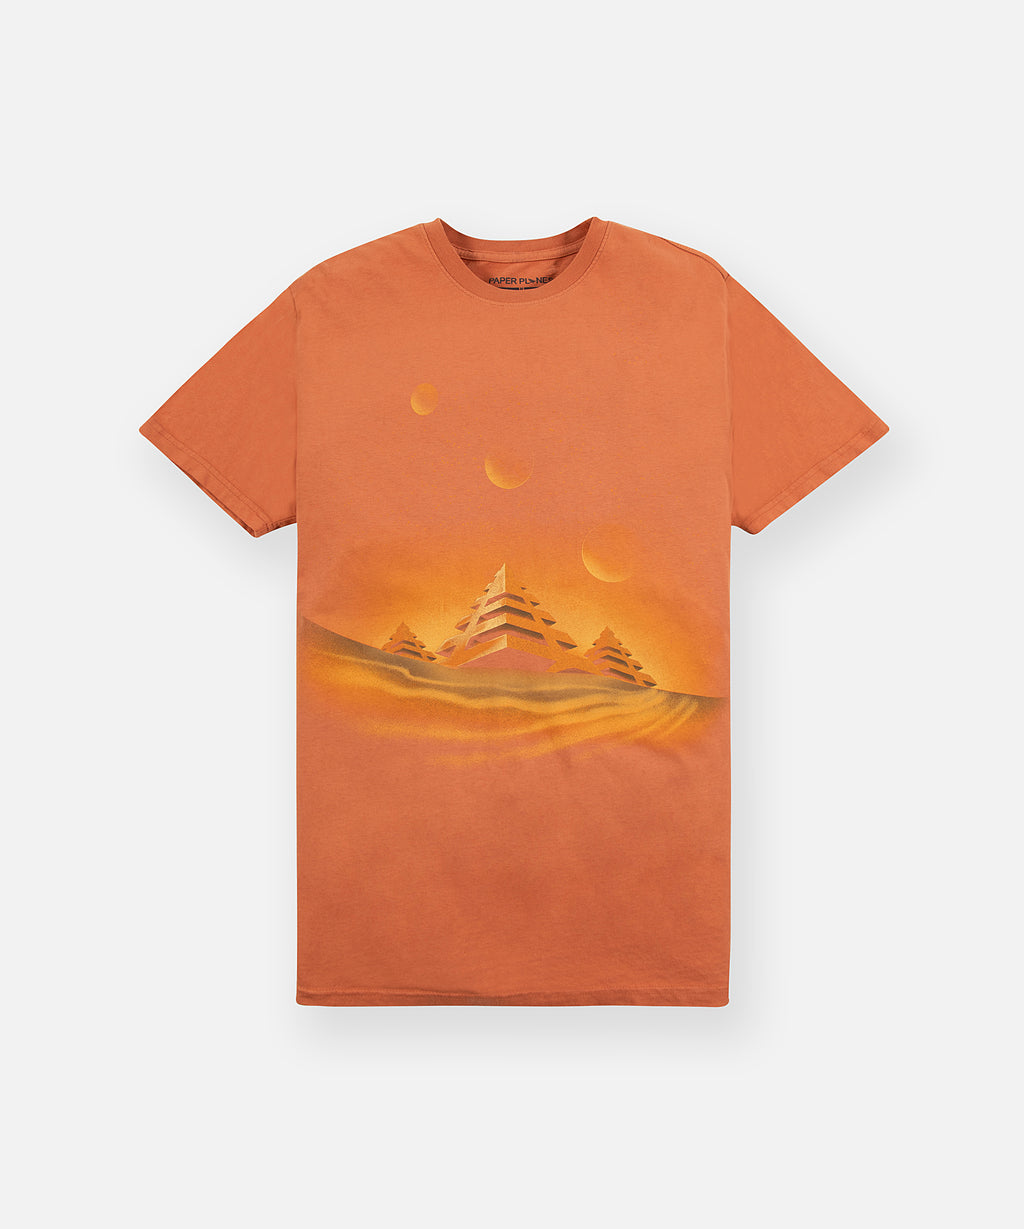  Paper Planes Valley of Kings Tee, color Ginger.